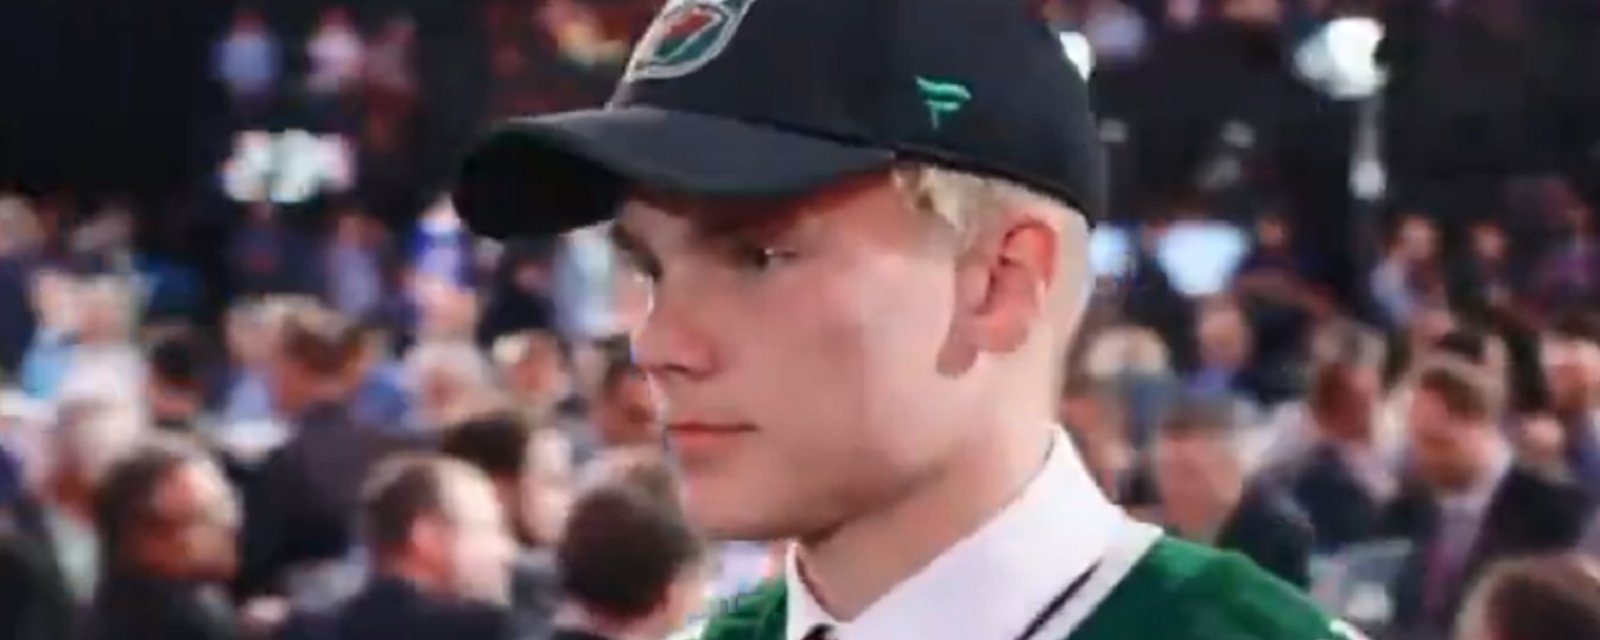 Aron Kiviharju whispers unbelievable message to GM that drafted him.